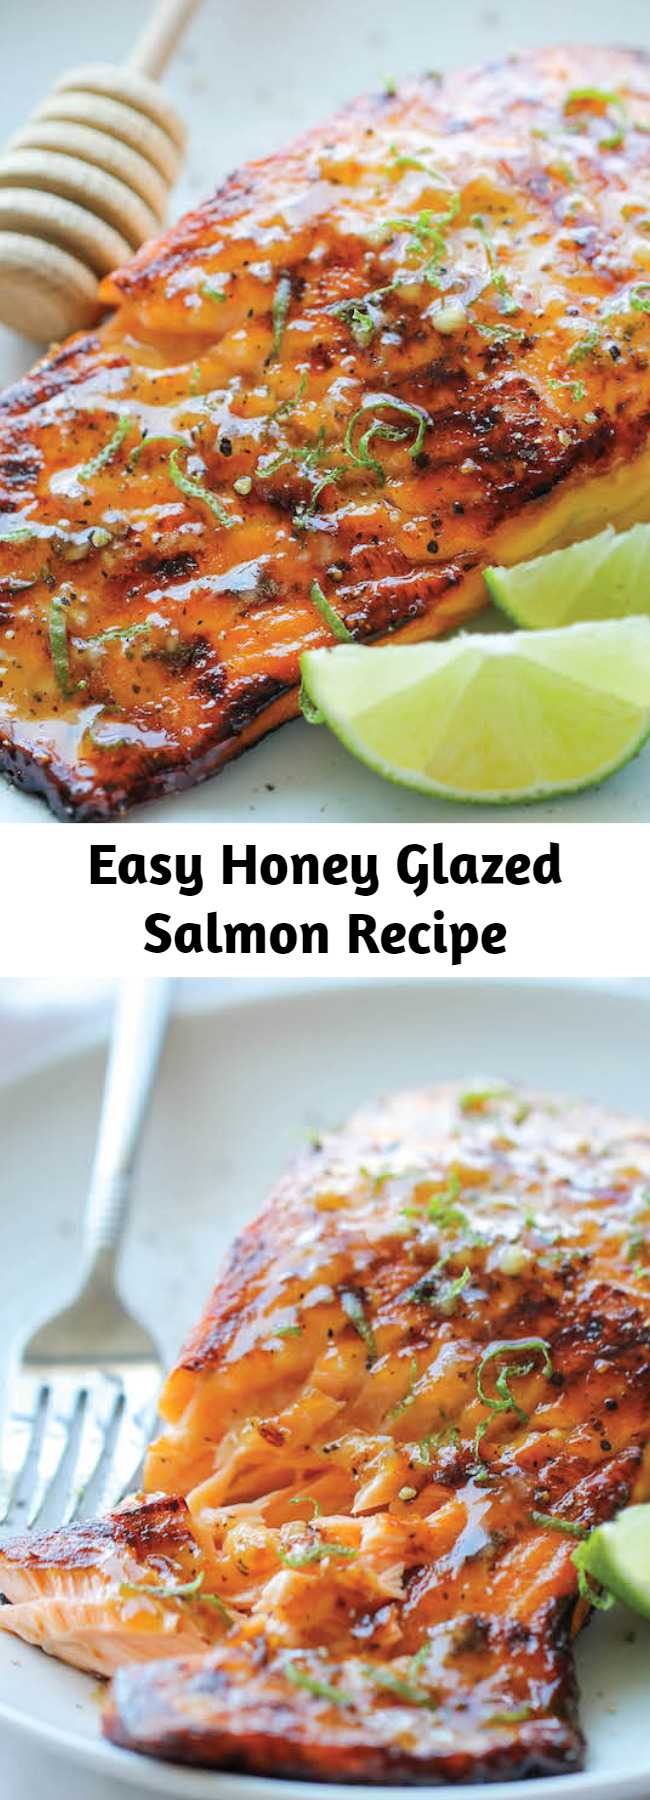 Easy Honey Glazed Salmon Recipe - The easiest, most flavorful salmon you will ever make. And that browned butter lime sauce is to die for!